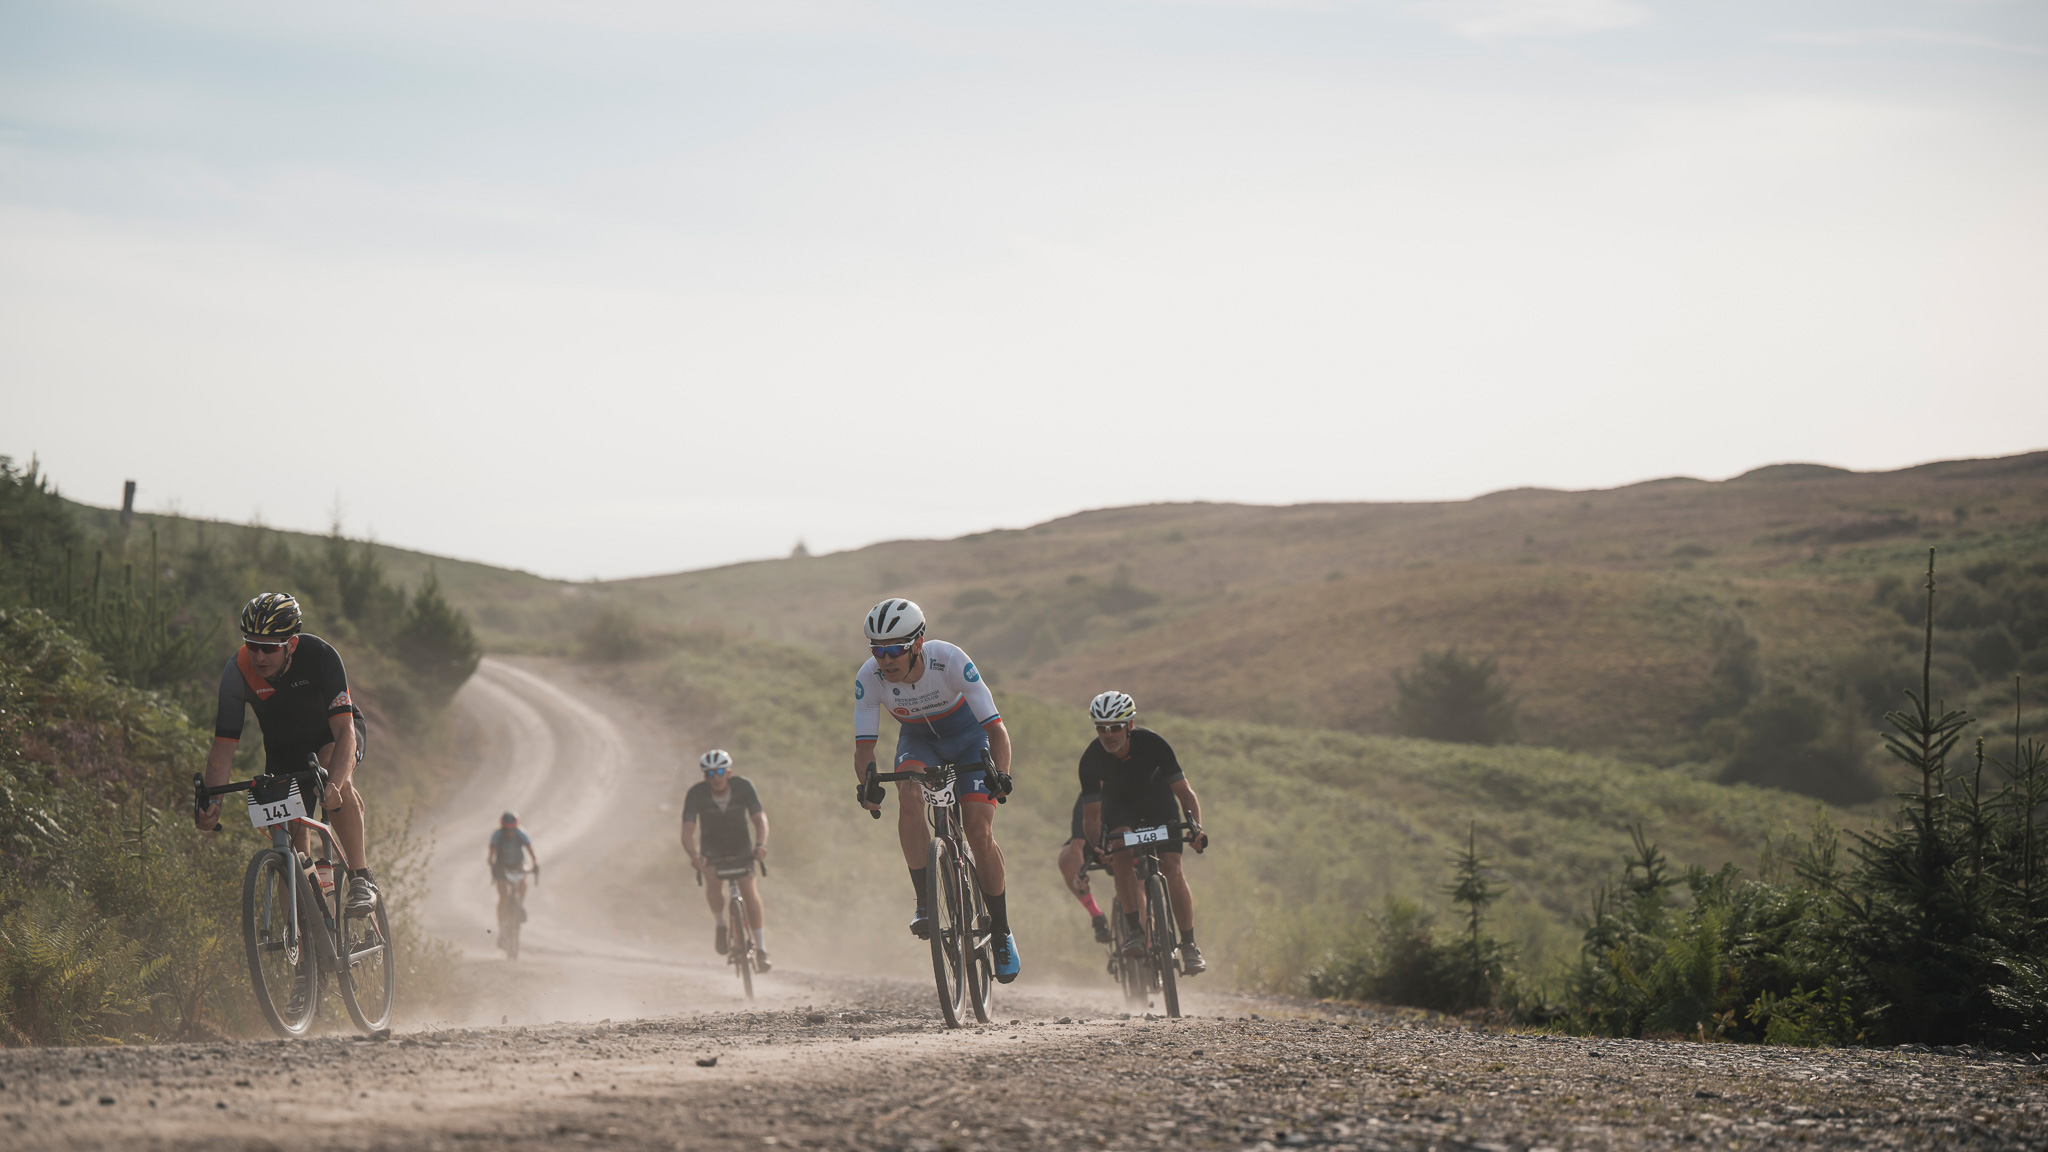 UCI Gravel World Series racing comes to Scotland in 2023 with the Gralloch